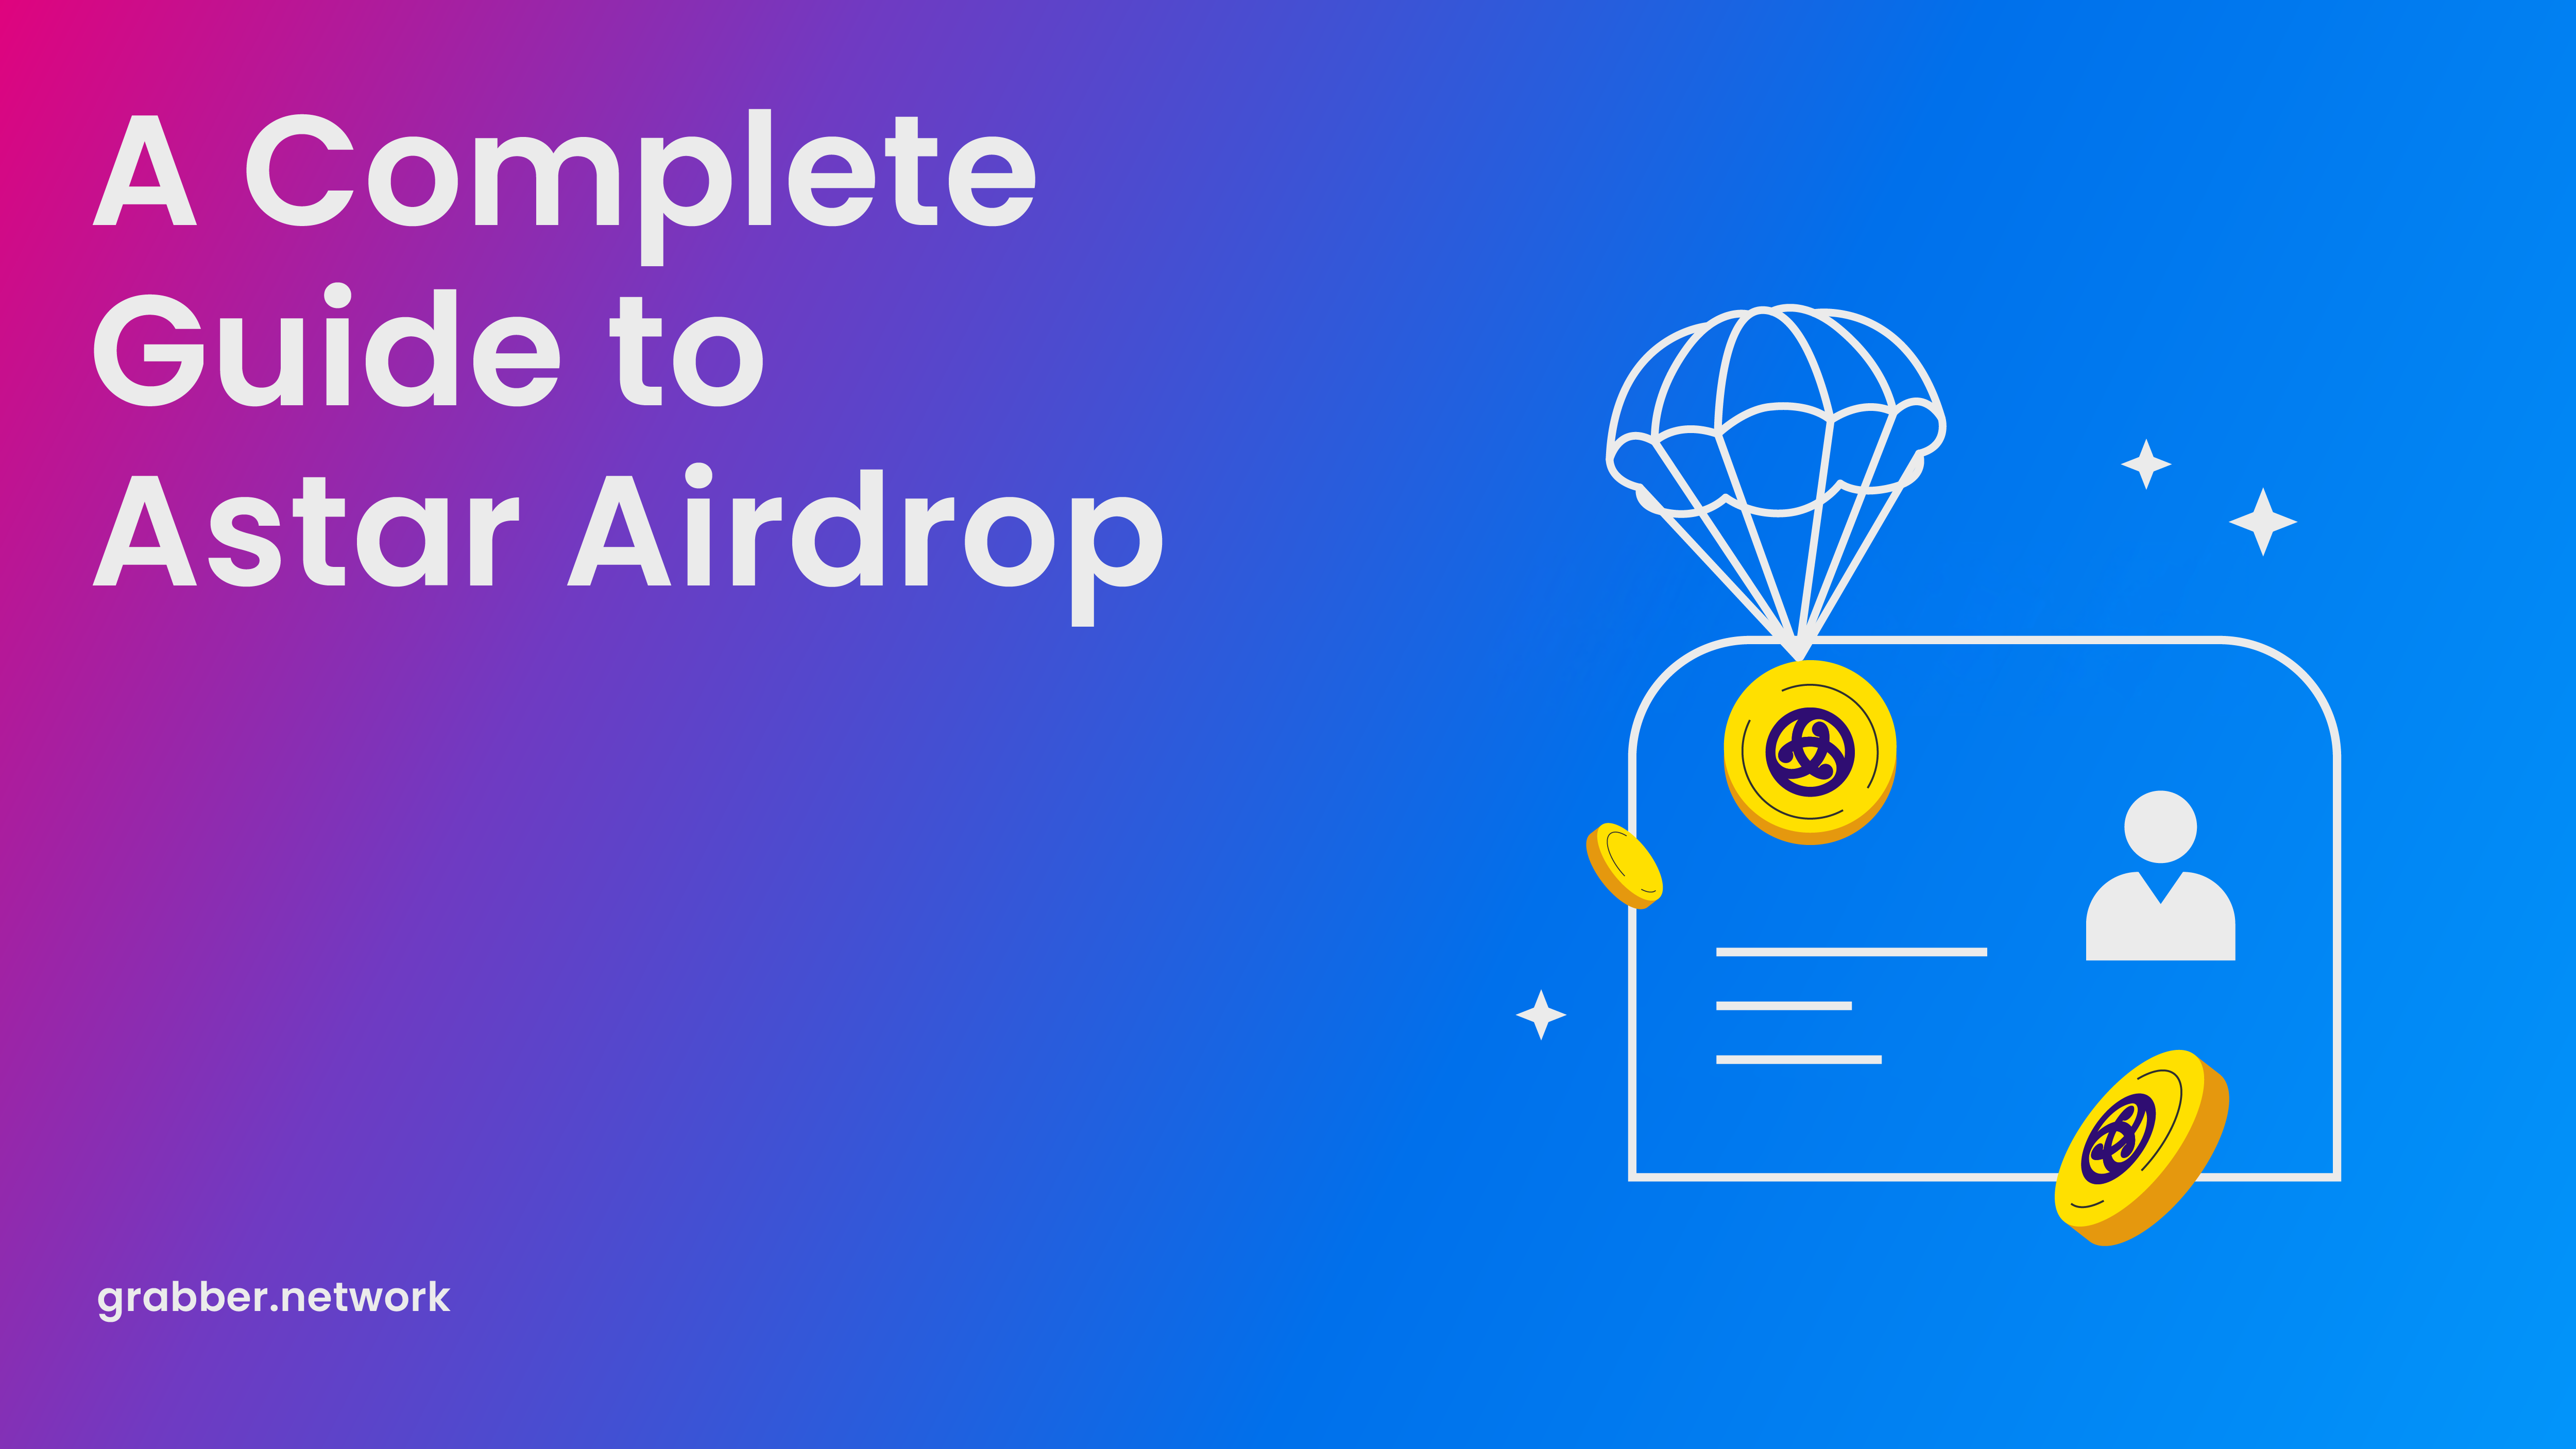 A Complete Guide to Astar Airdrop